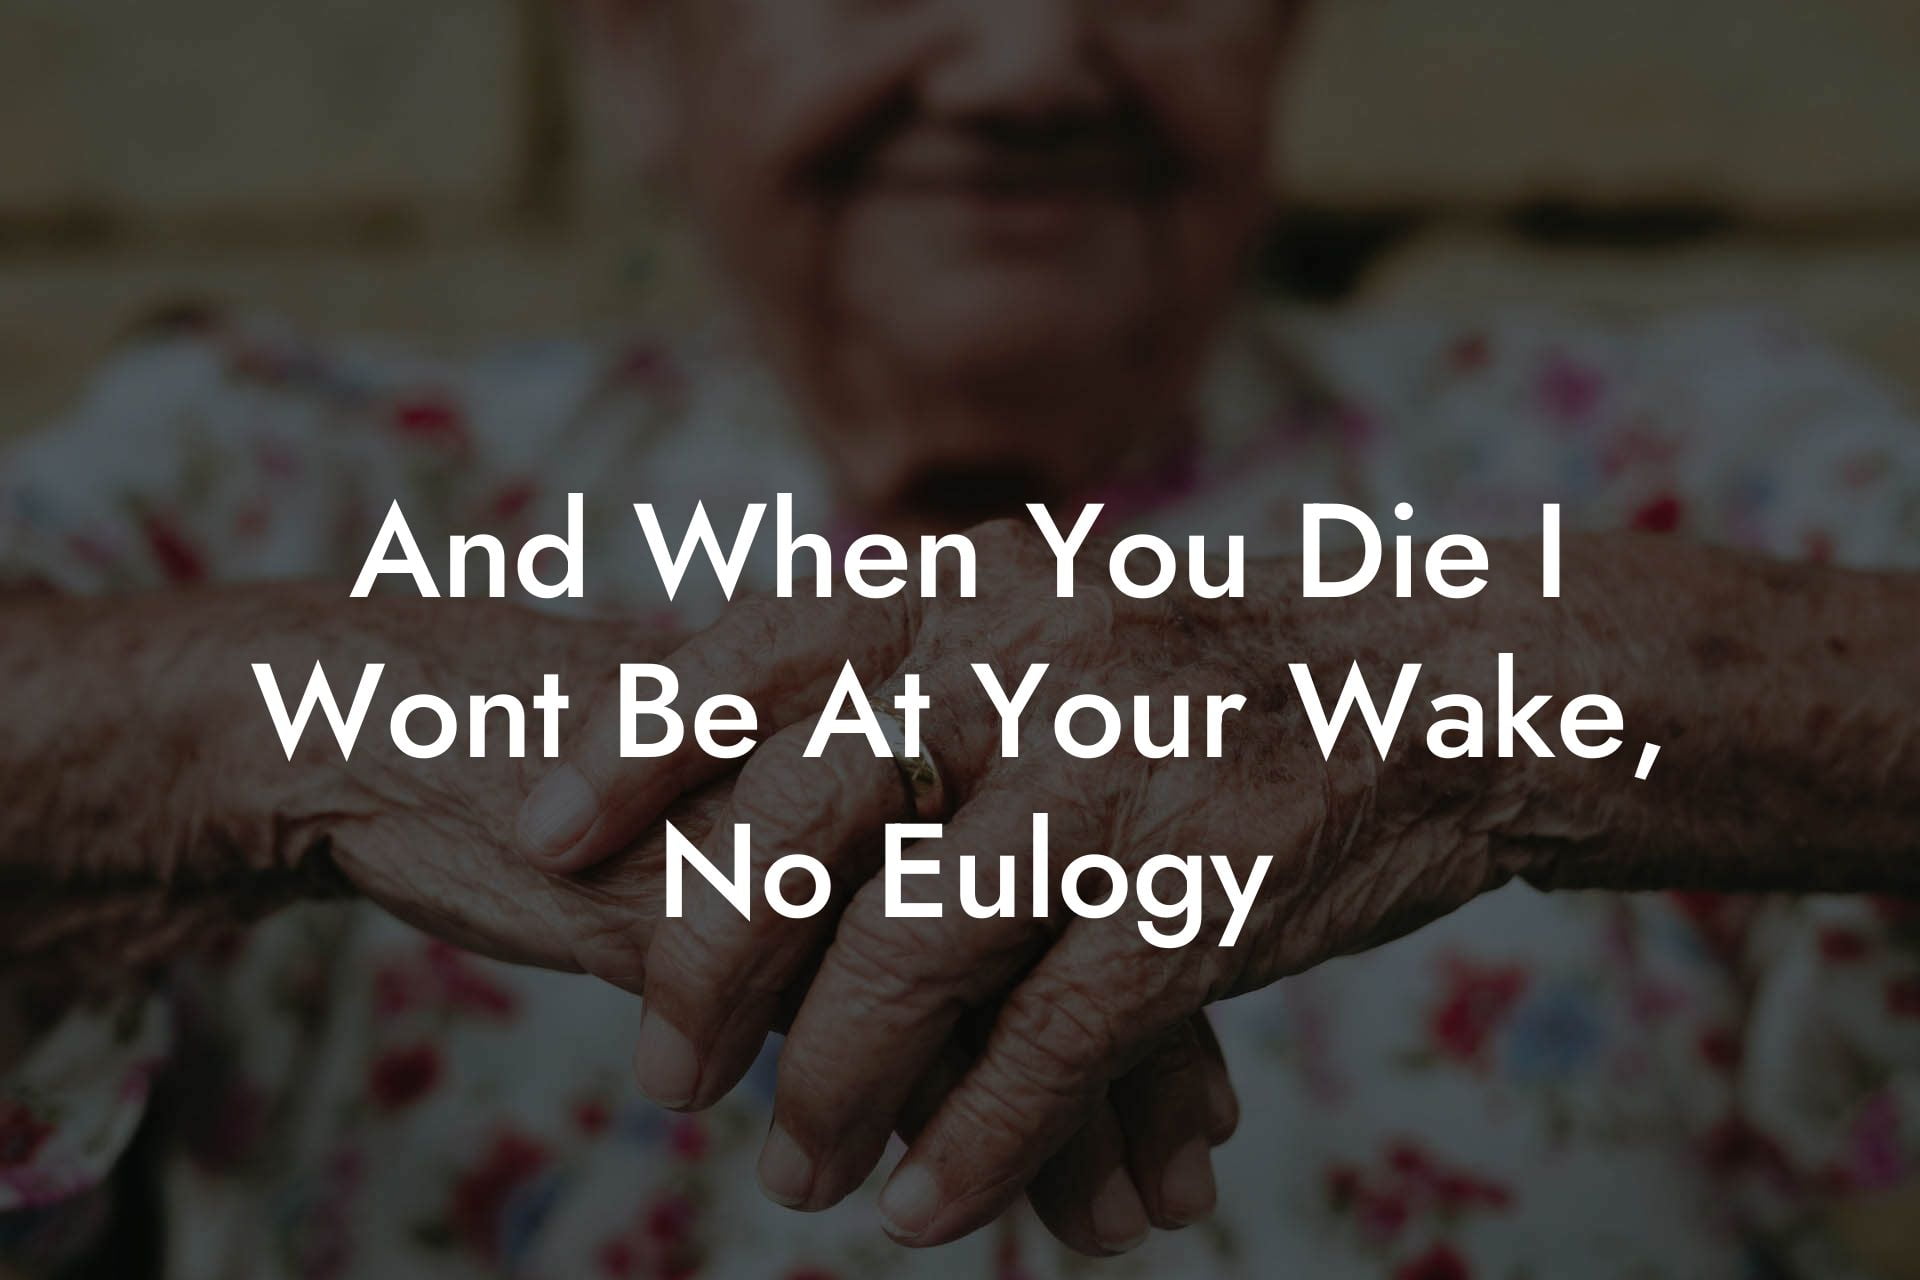 And When You Die I Wont Be At Your Wake, No Eulogy